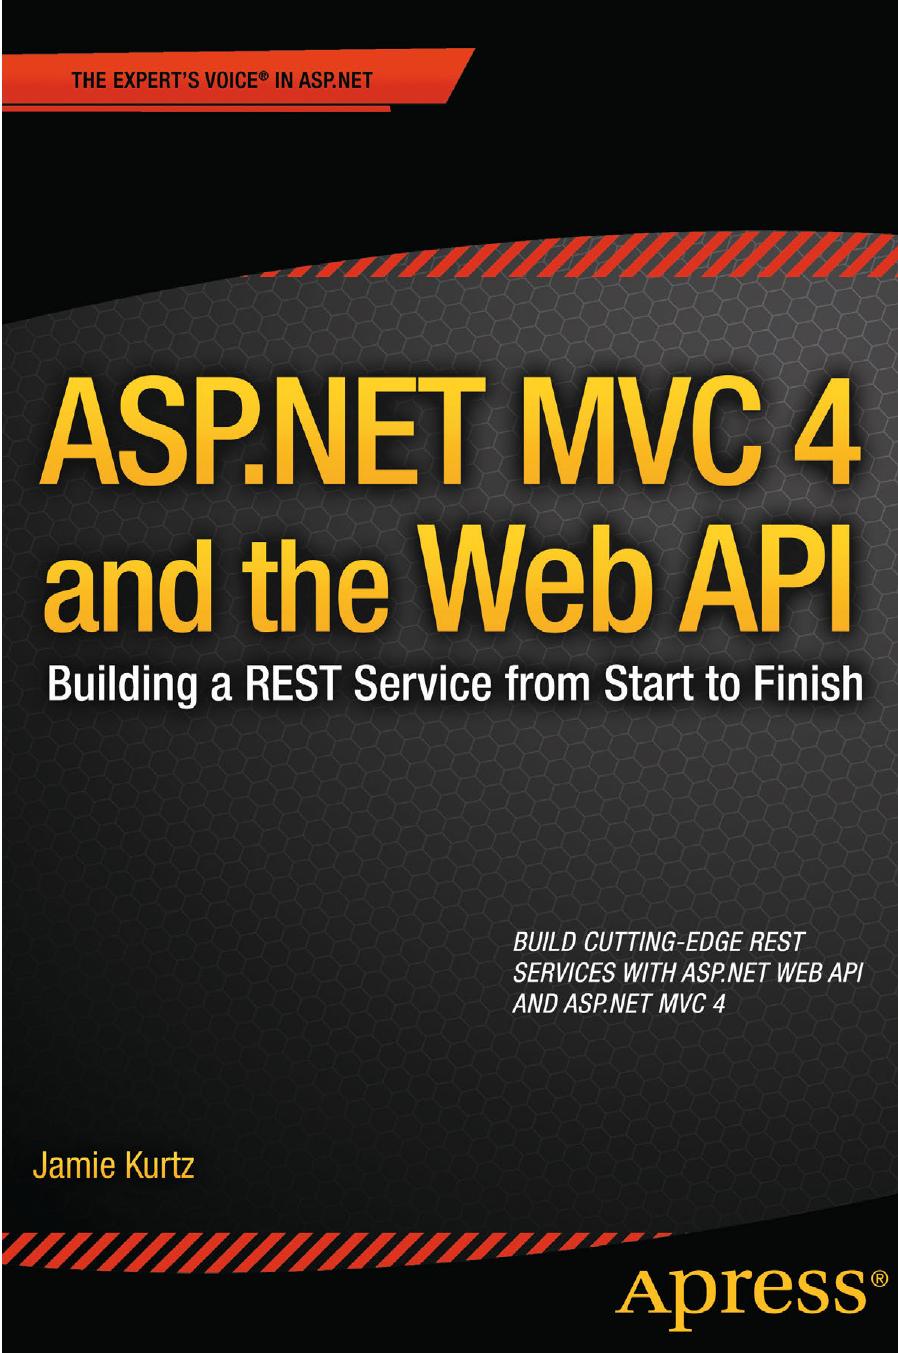 ASP.NET MVC 4 and the Web API: Building a REST Service From Start to Finish